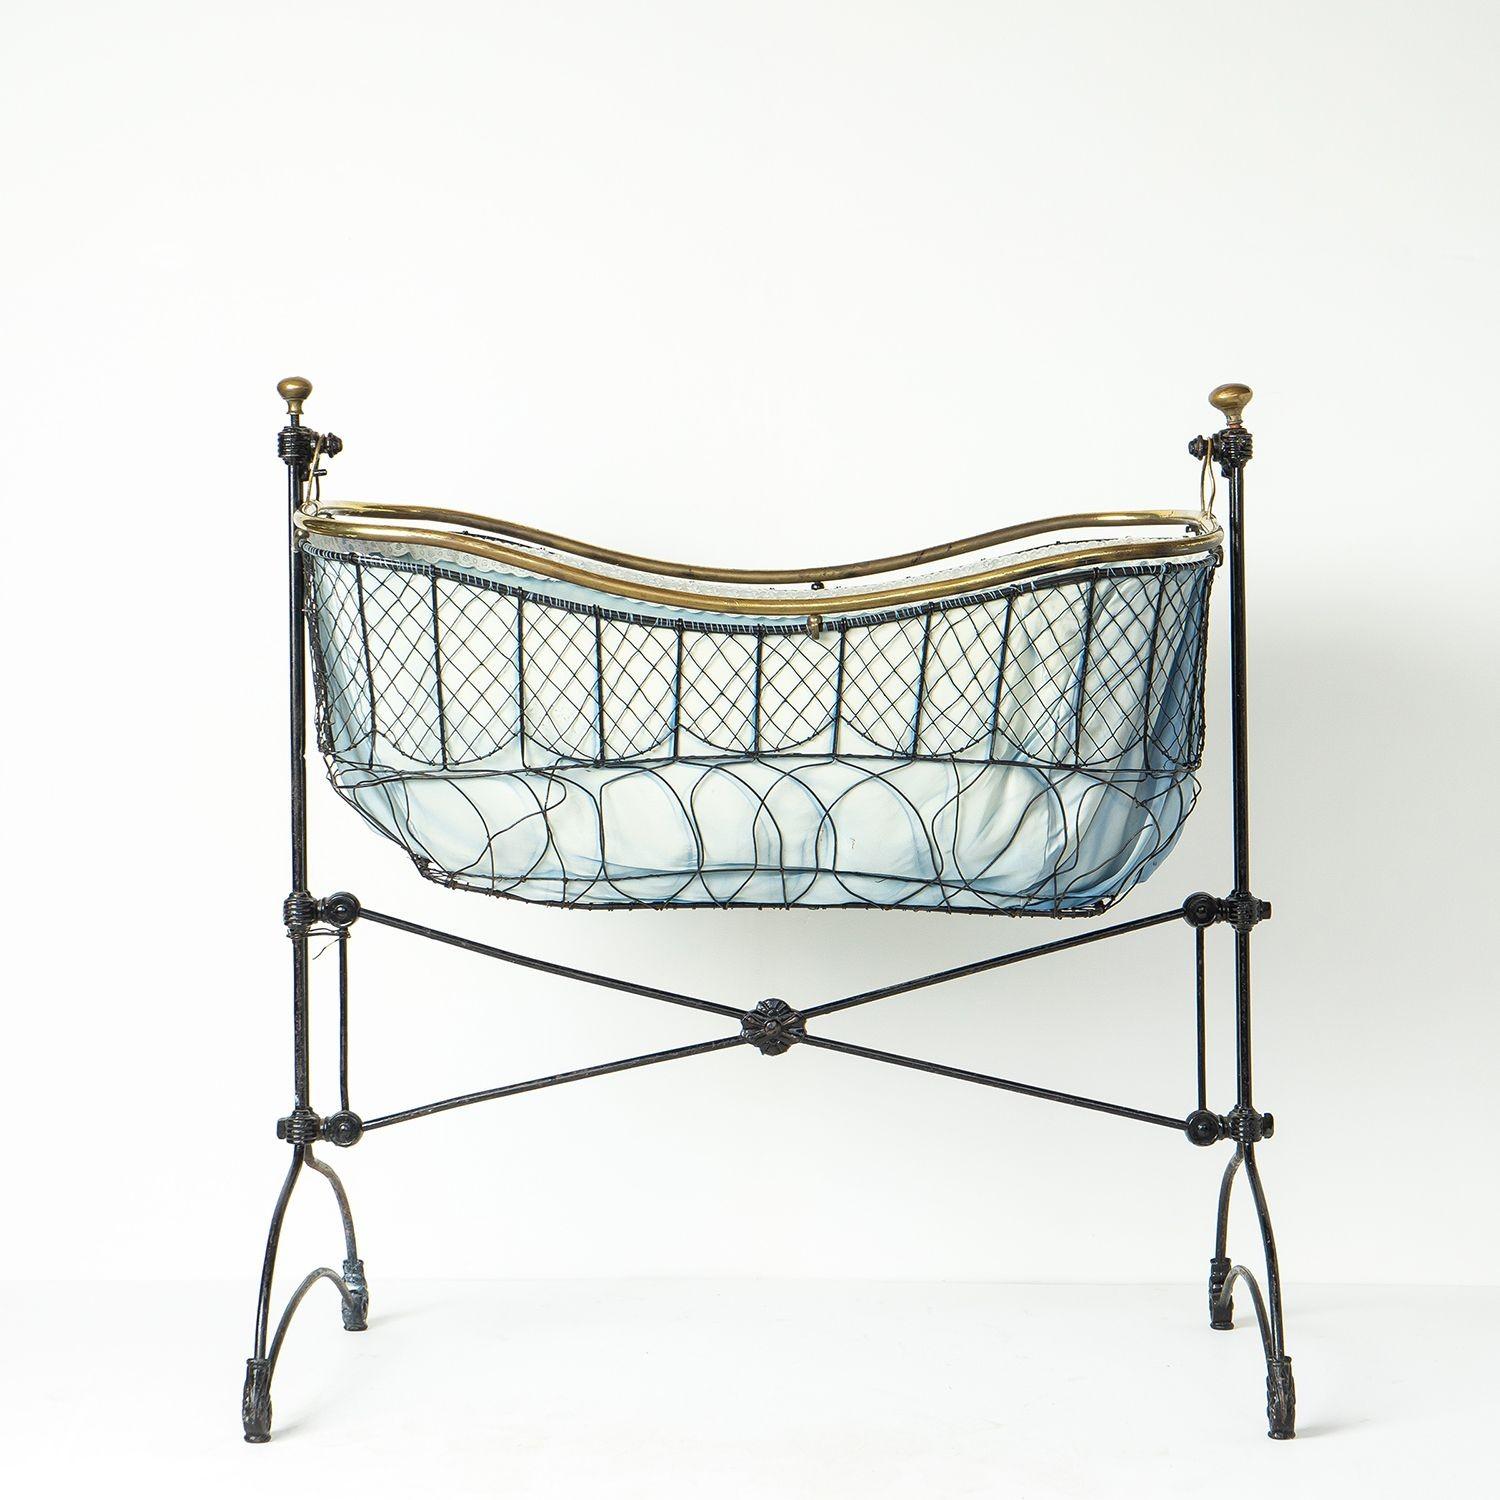 Antique Wire Work Moses Basket Crib

The Rolls Royce of Victorian cradles.

Cast and wrought iron frame with wire work cradle.

Brass rim and knob finials.

Easy rocking action.

Original blue cotton and white lace fitted interior.

It is in good